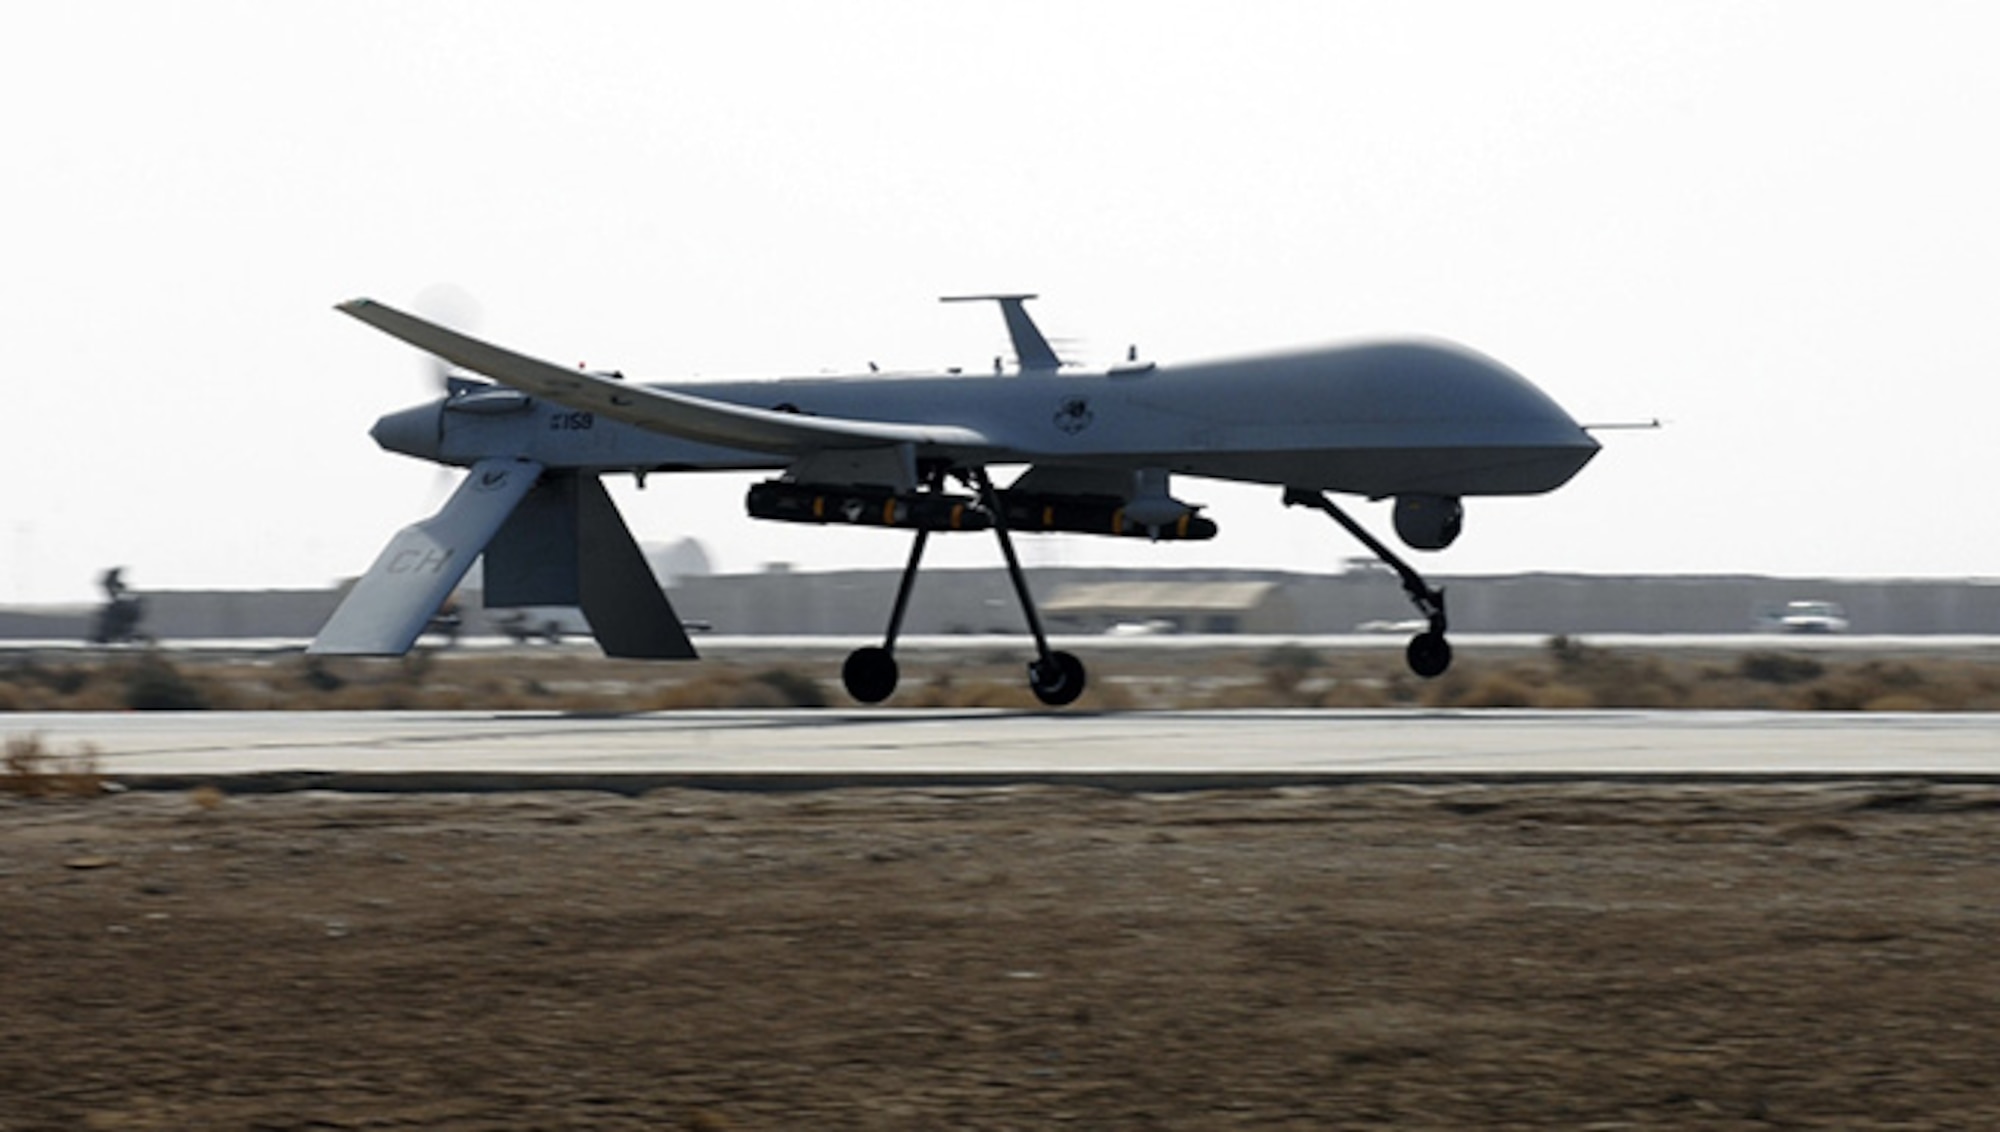 An Air Force MQ-1B Predator from the 361st Expeditionary Reconnaissance Squadron takes off from Ali Base, Iraq, in support of Operation Iraqi Freedom. The Predator is a medium-altitude, long-endurance, remotely piloted aircraft capable of conducting armed reconnaissance. (U.S. Air Force photo/Airman 1st Class Jonathan Snyder)